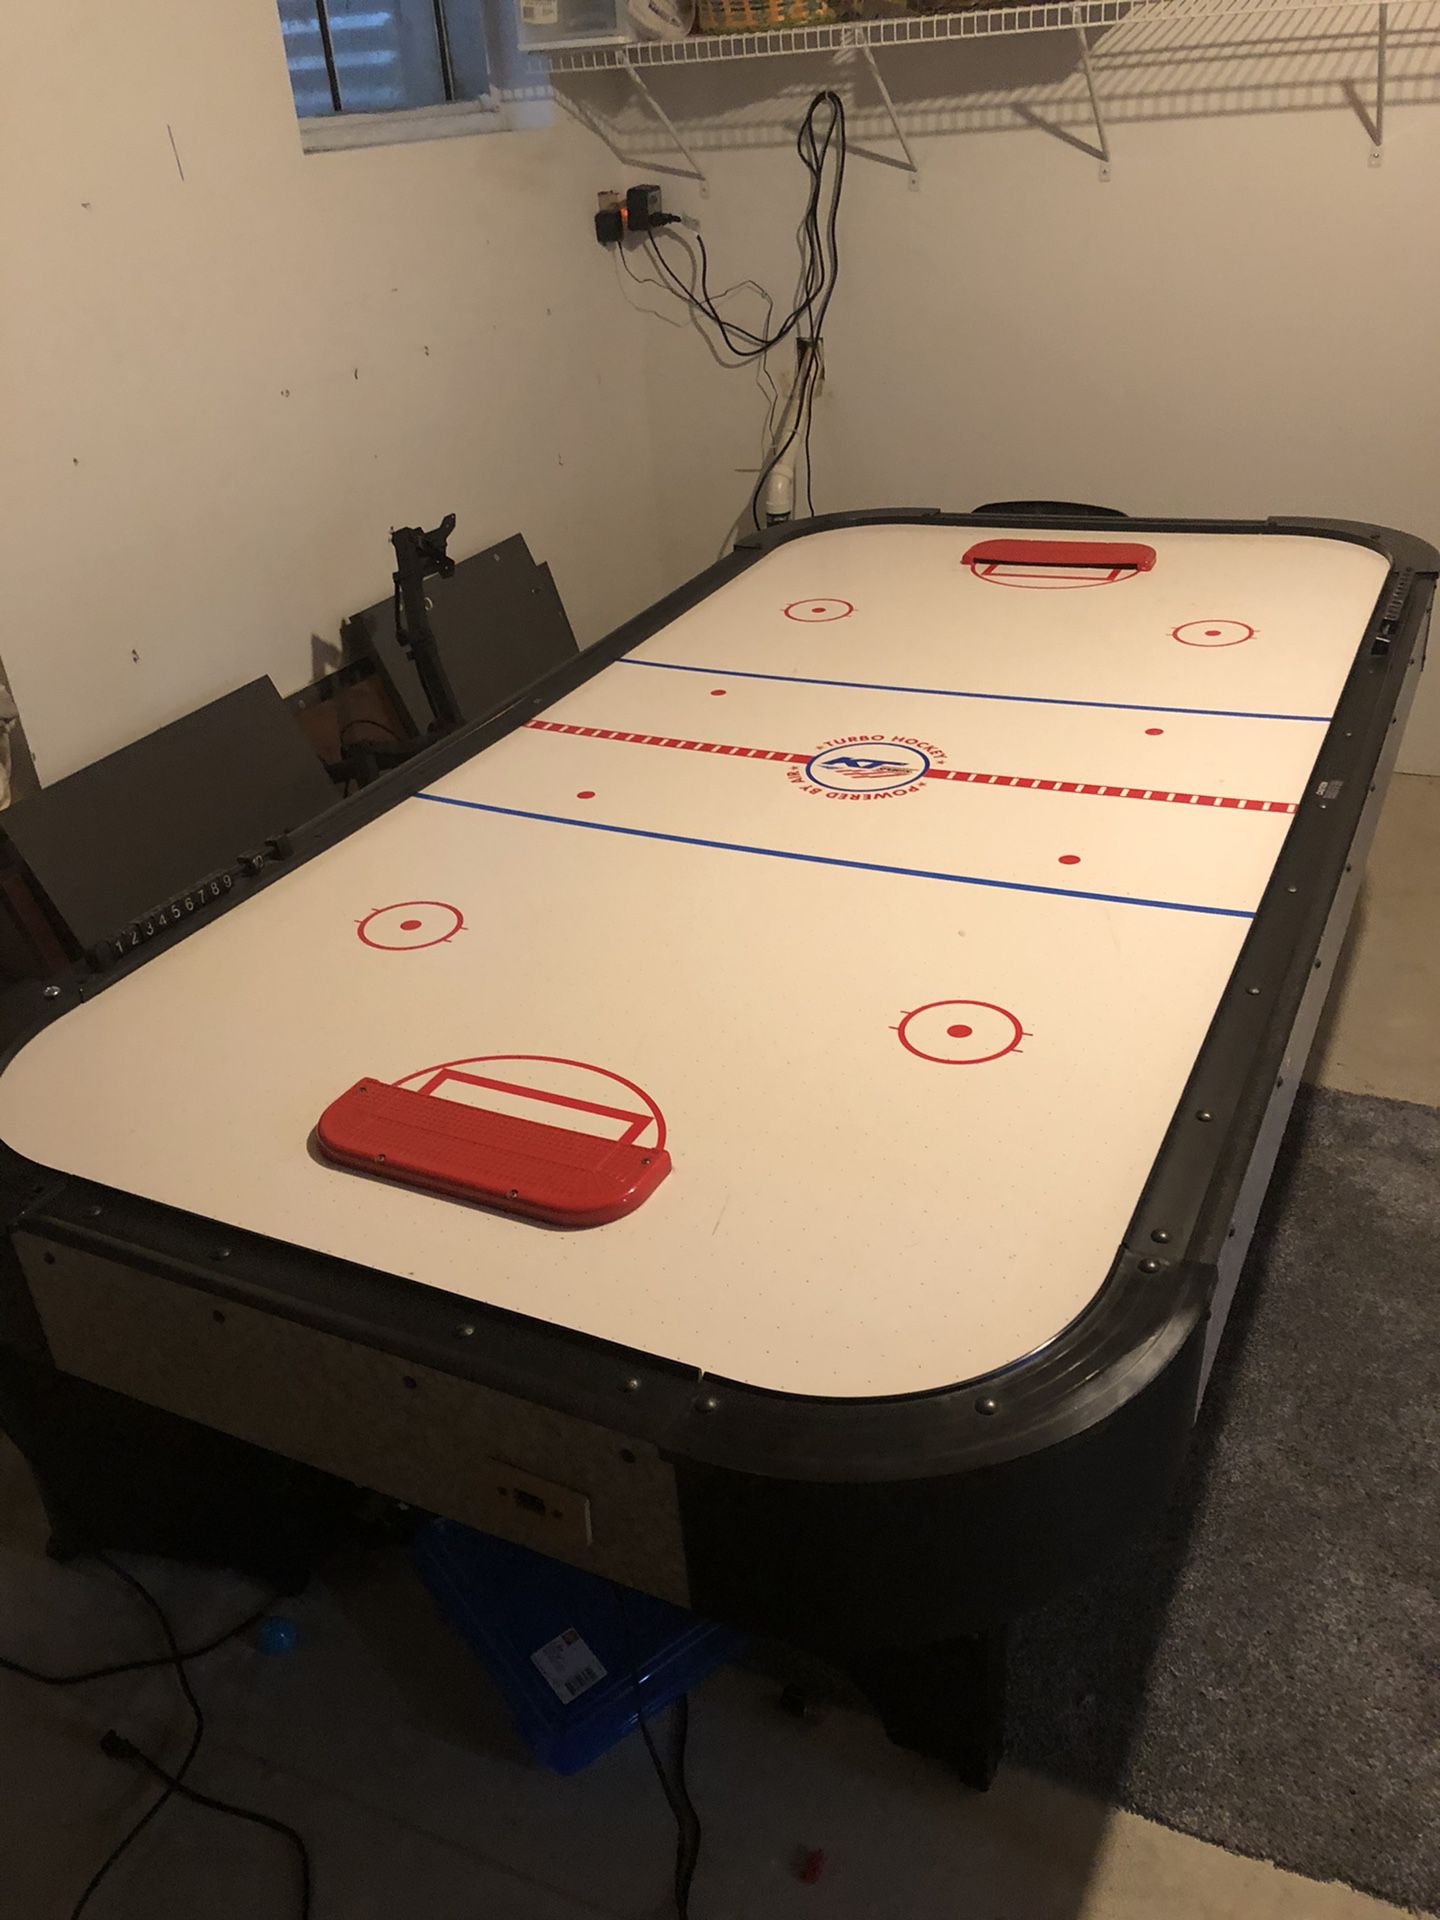 Air hockey table in working condition